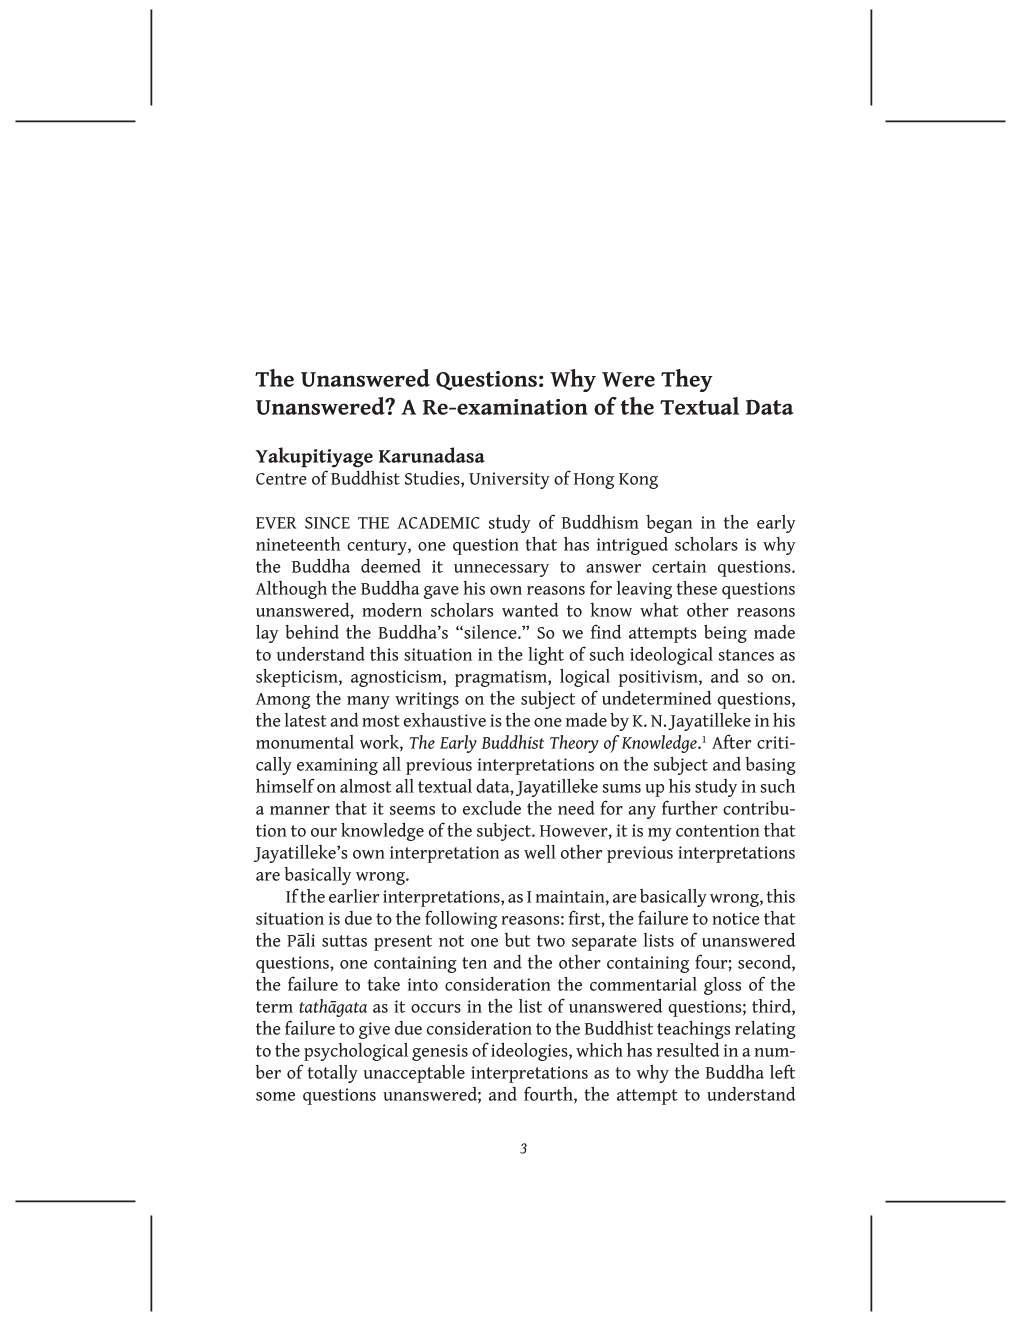 The Unanswered Questions: Why Were They Unanswered? a Re-Examination of the Textual Data